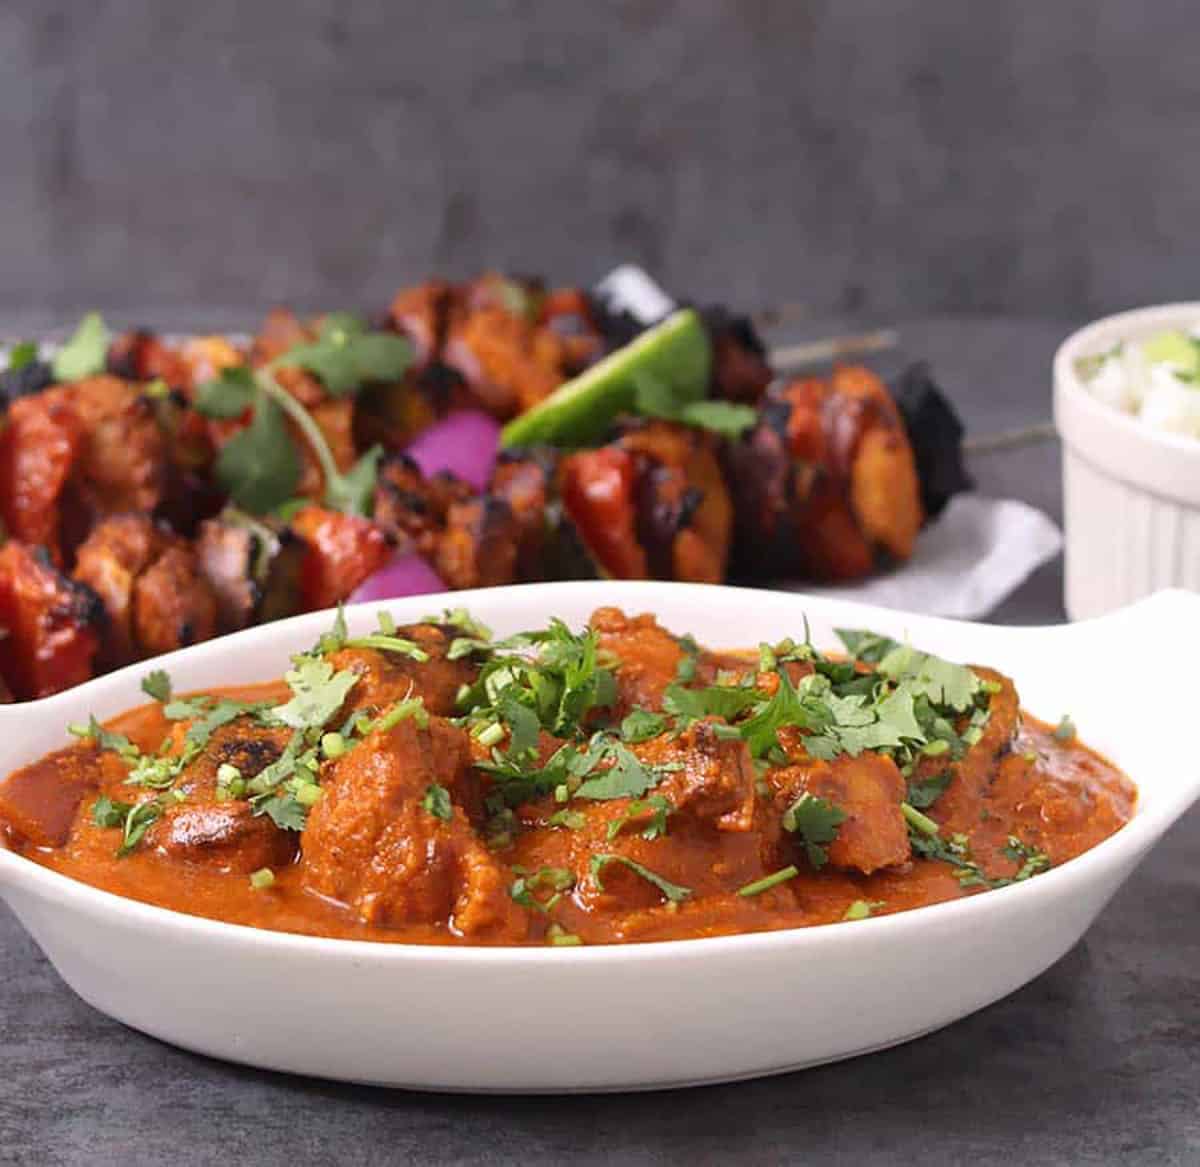 Creamy and spicy murgh tikka masala serve in a white serving bowl and garnished with finely chopped cilantro.